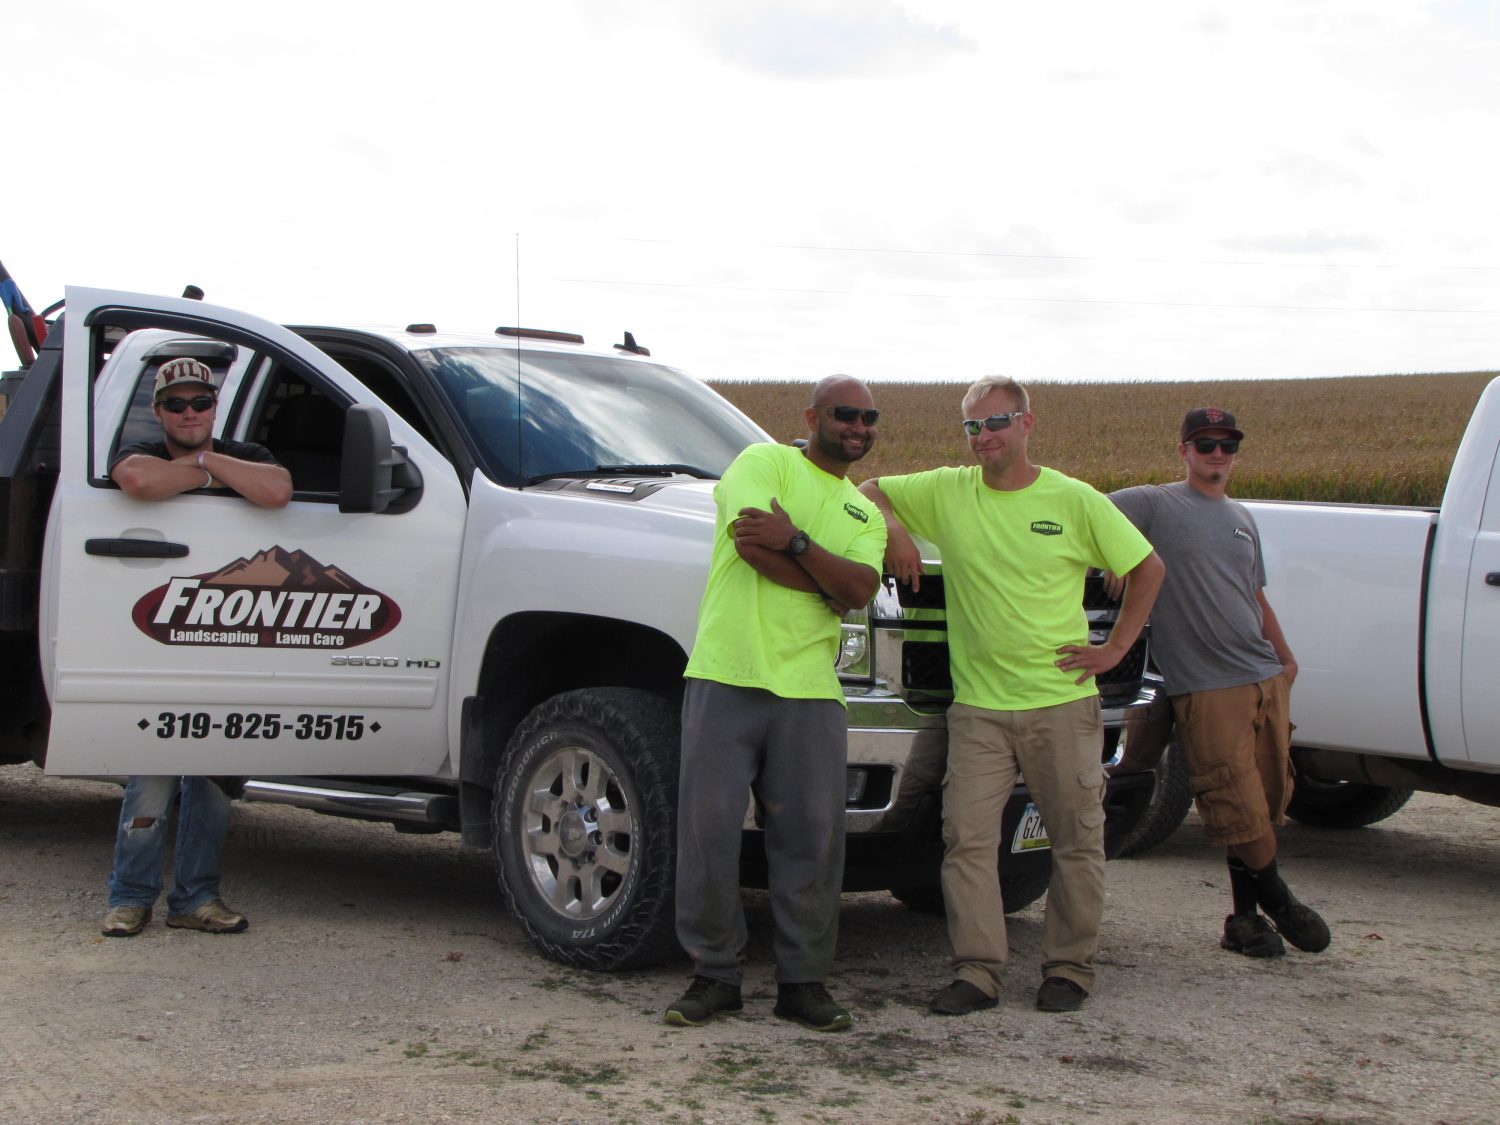 Frontier Landscaping & Lawn Care Crew